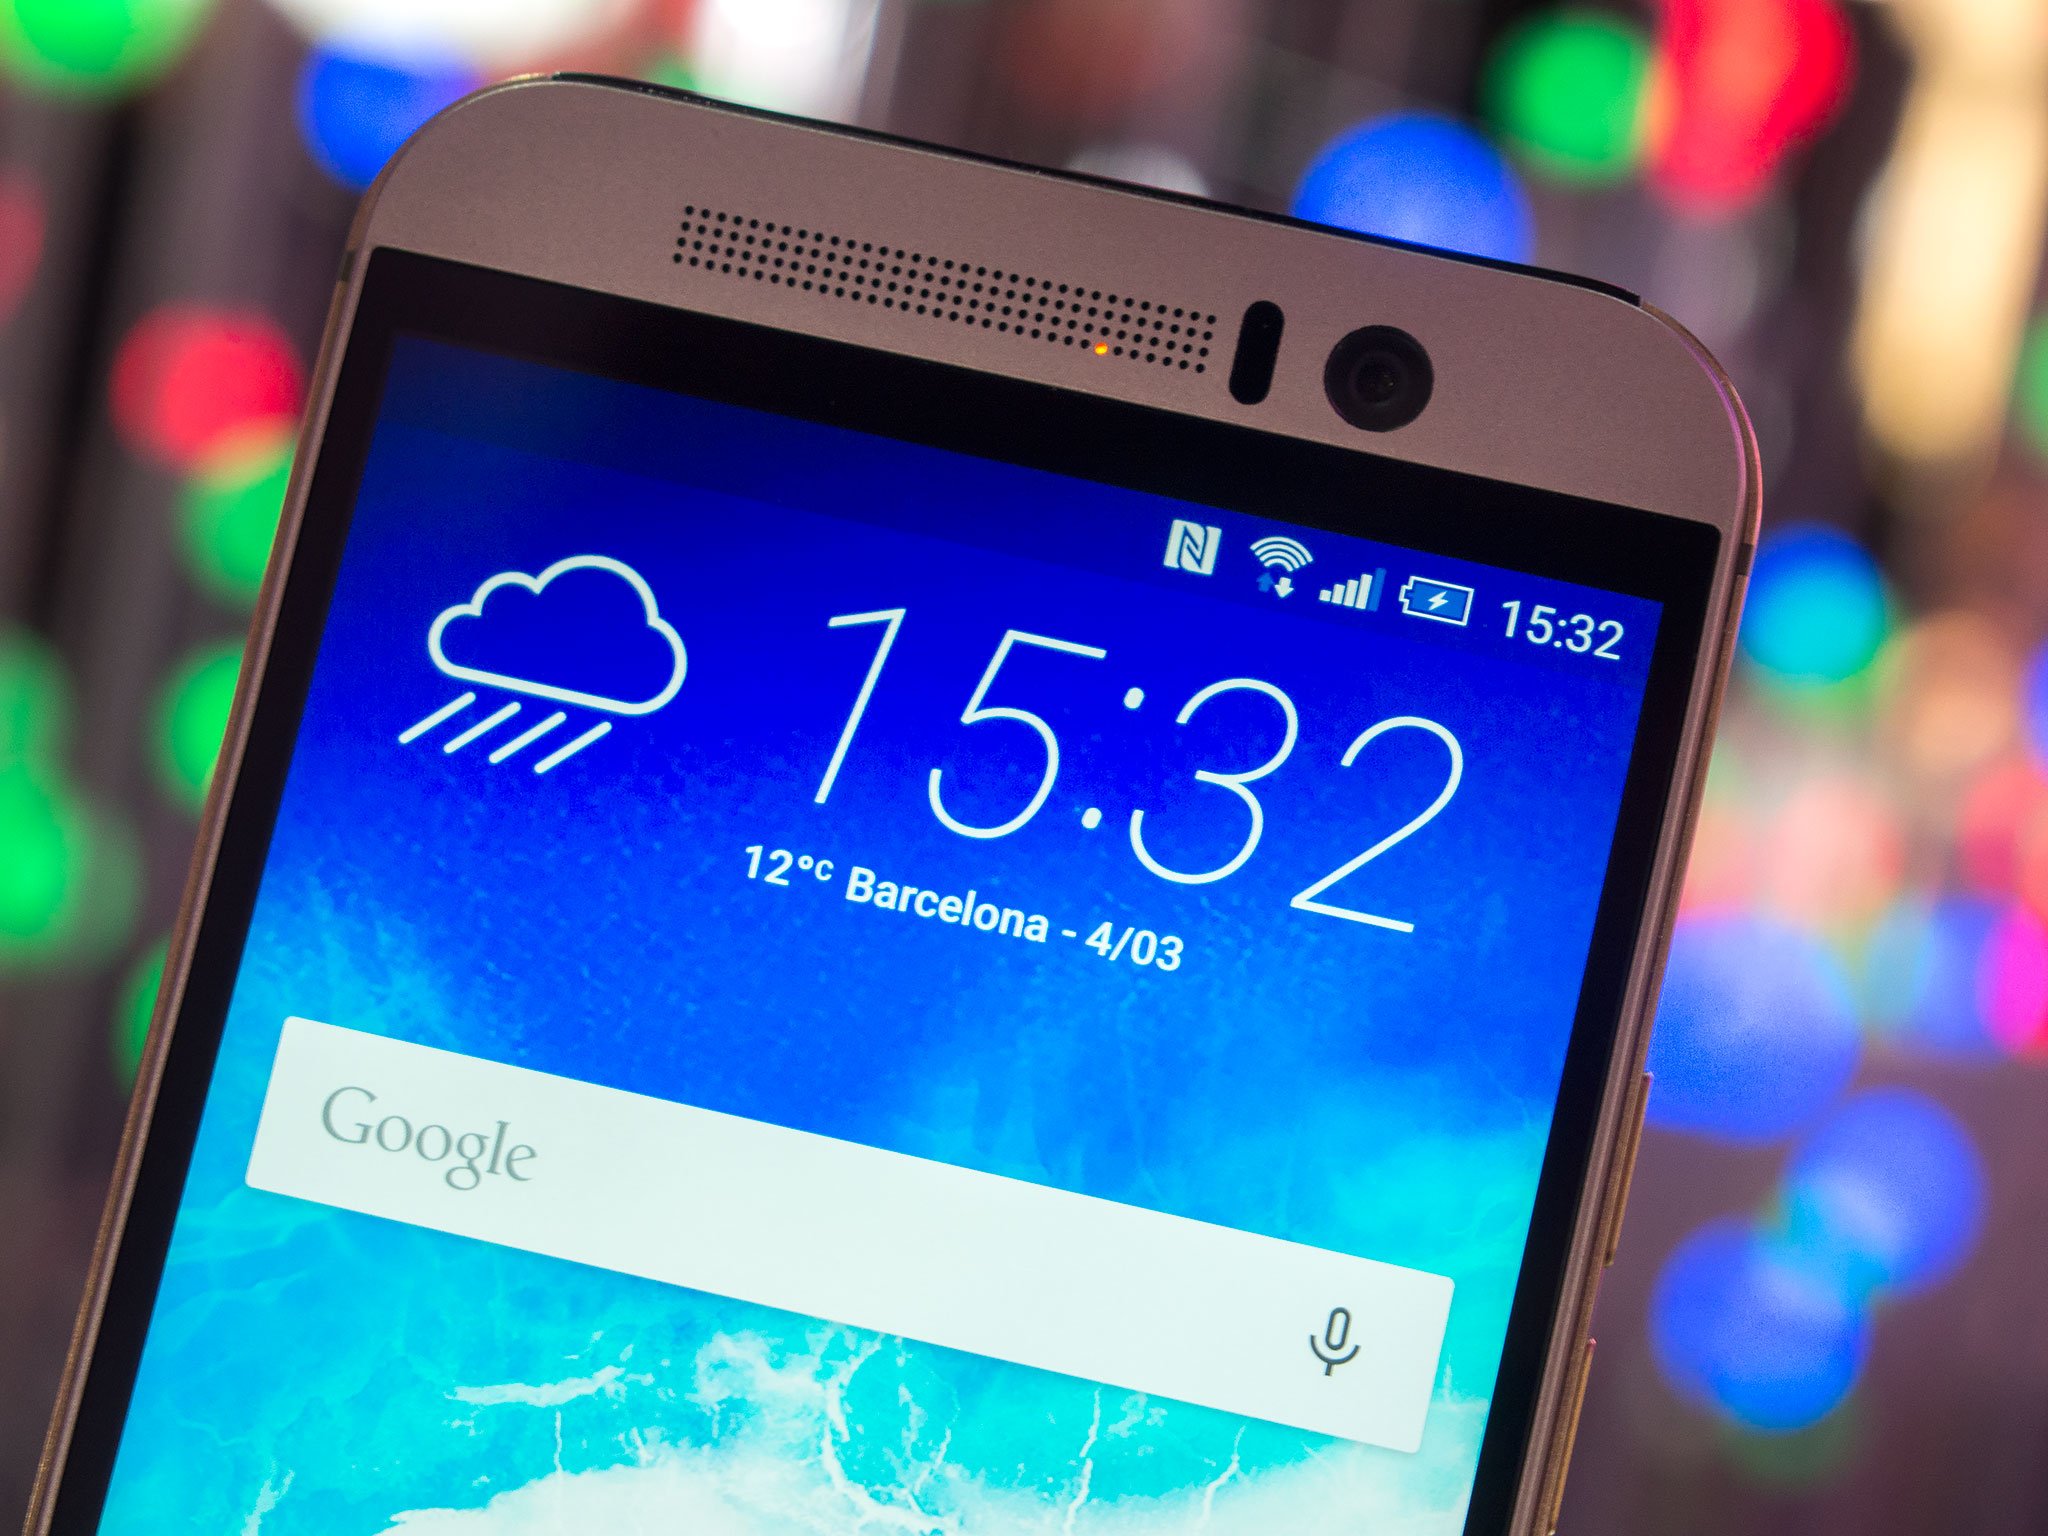 How To Take A Screenshot On The Htc One M9 Android Central